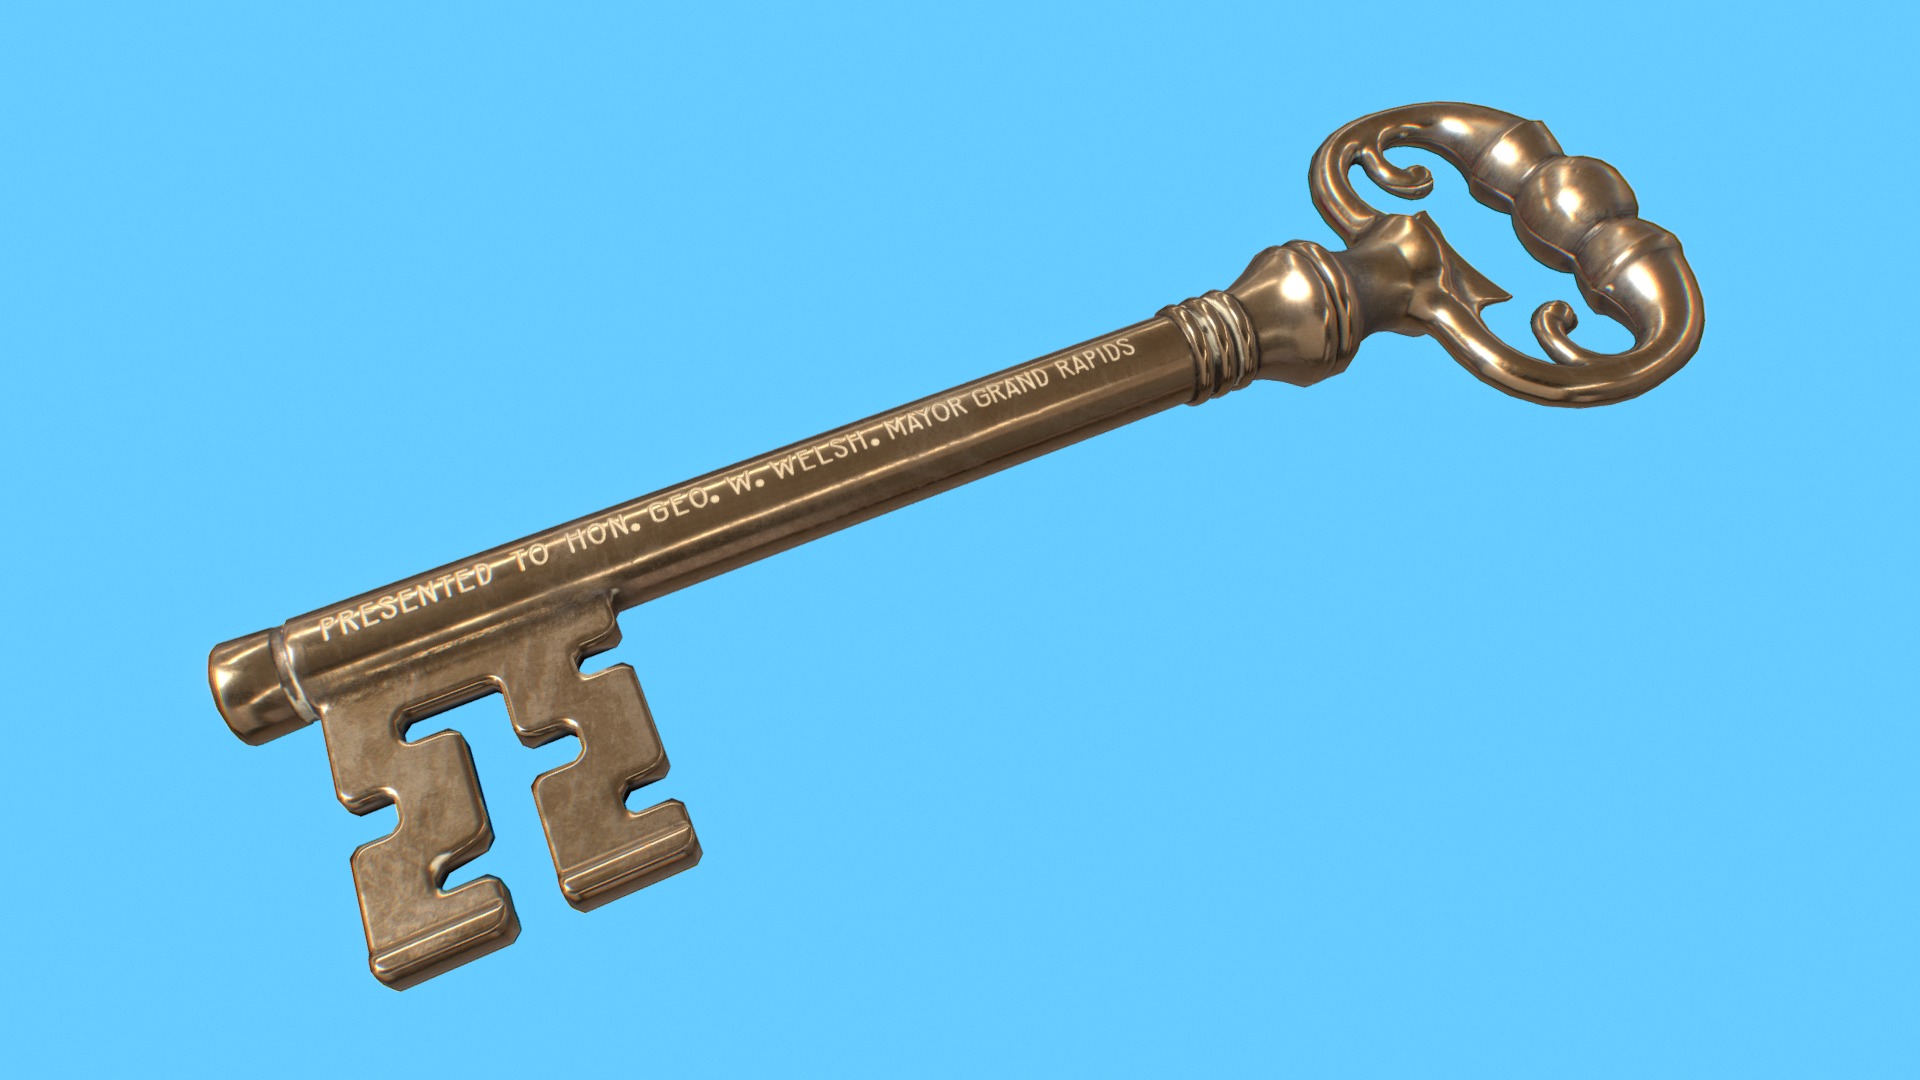 3D model Key to the city of Grand Rapids - This is a 3D model of the Key to the city of Grand Rapids. The 3D model is about a sword with a handle.